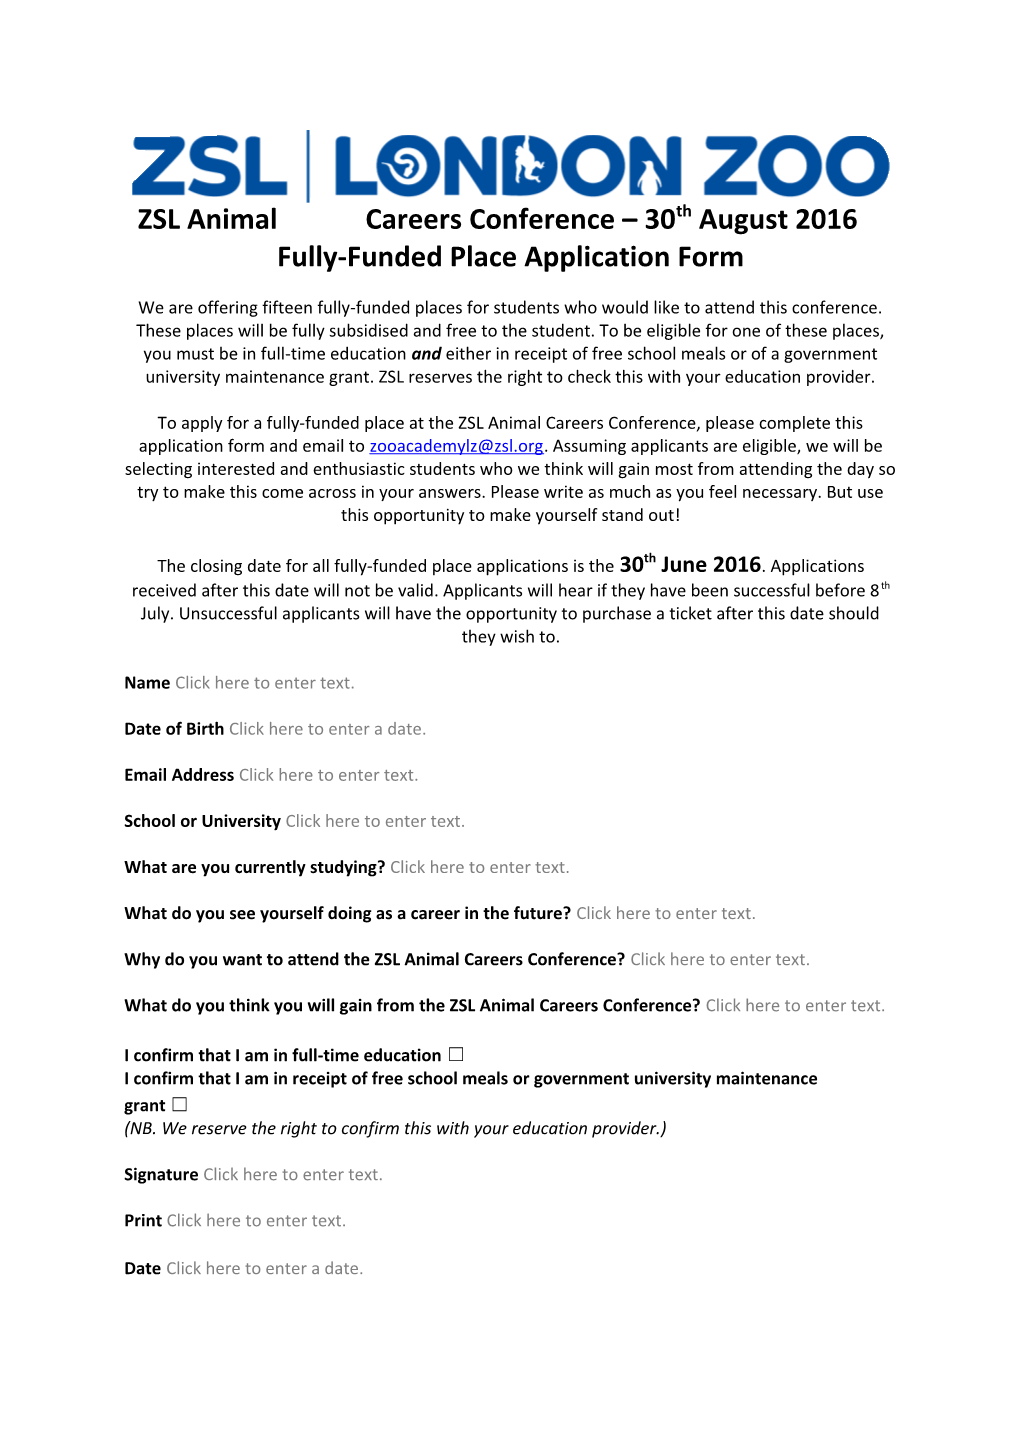 Fully-Funded Place Application Form